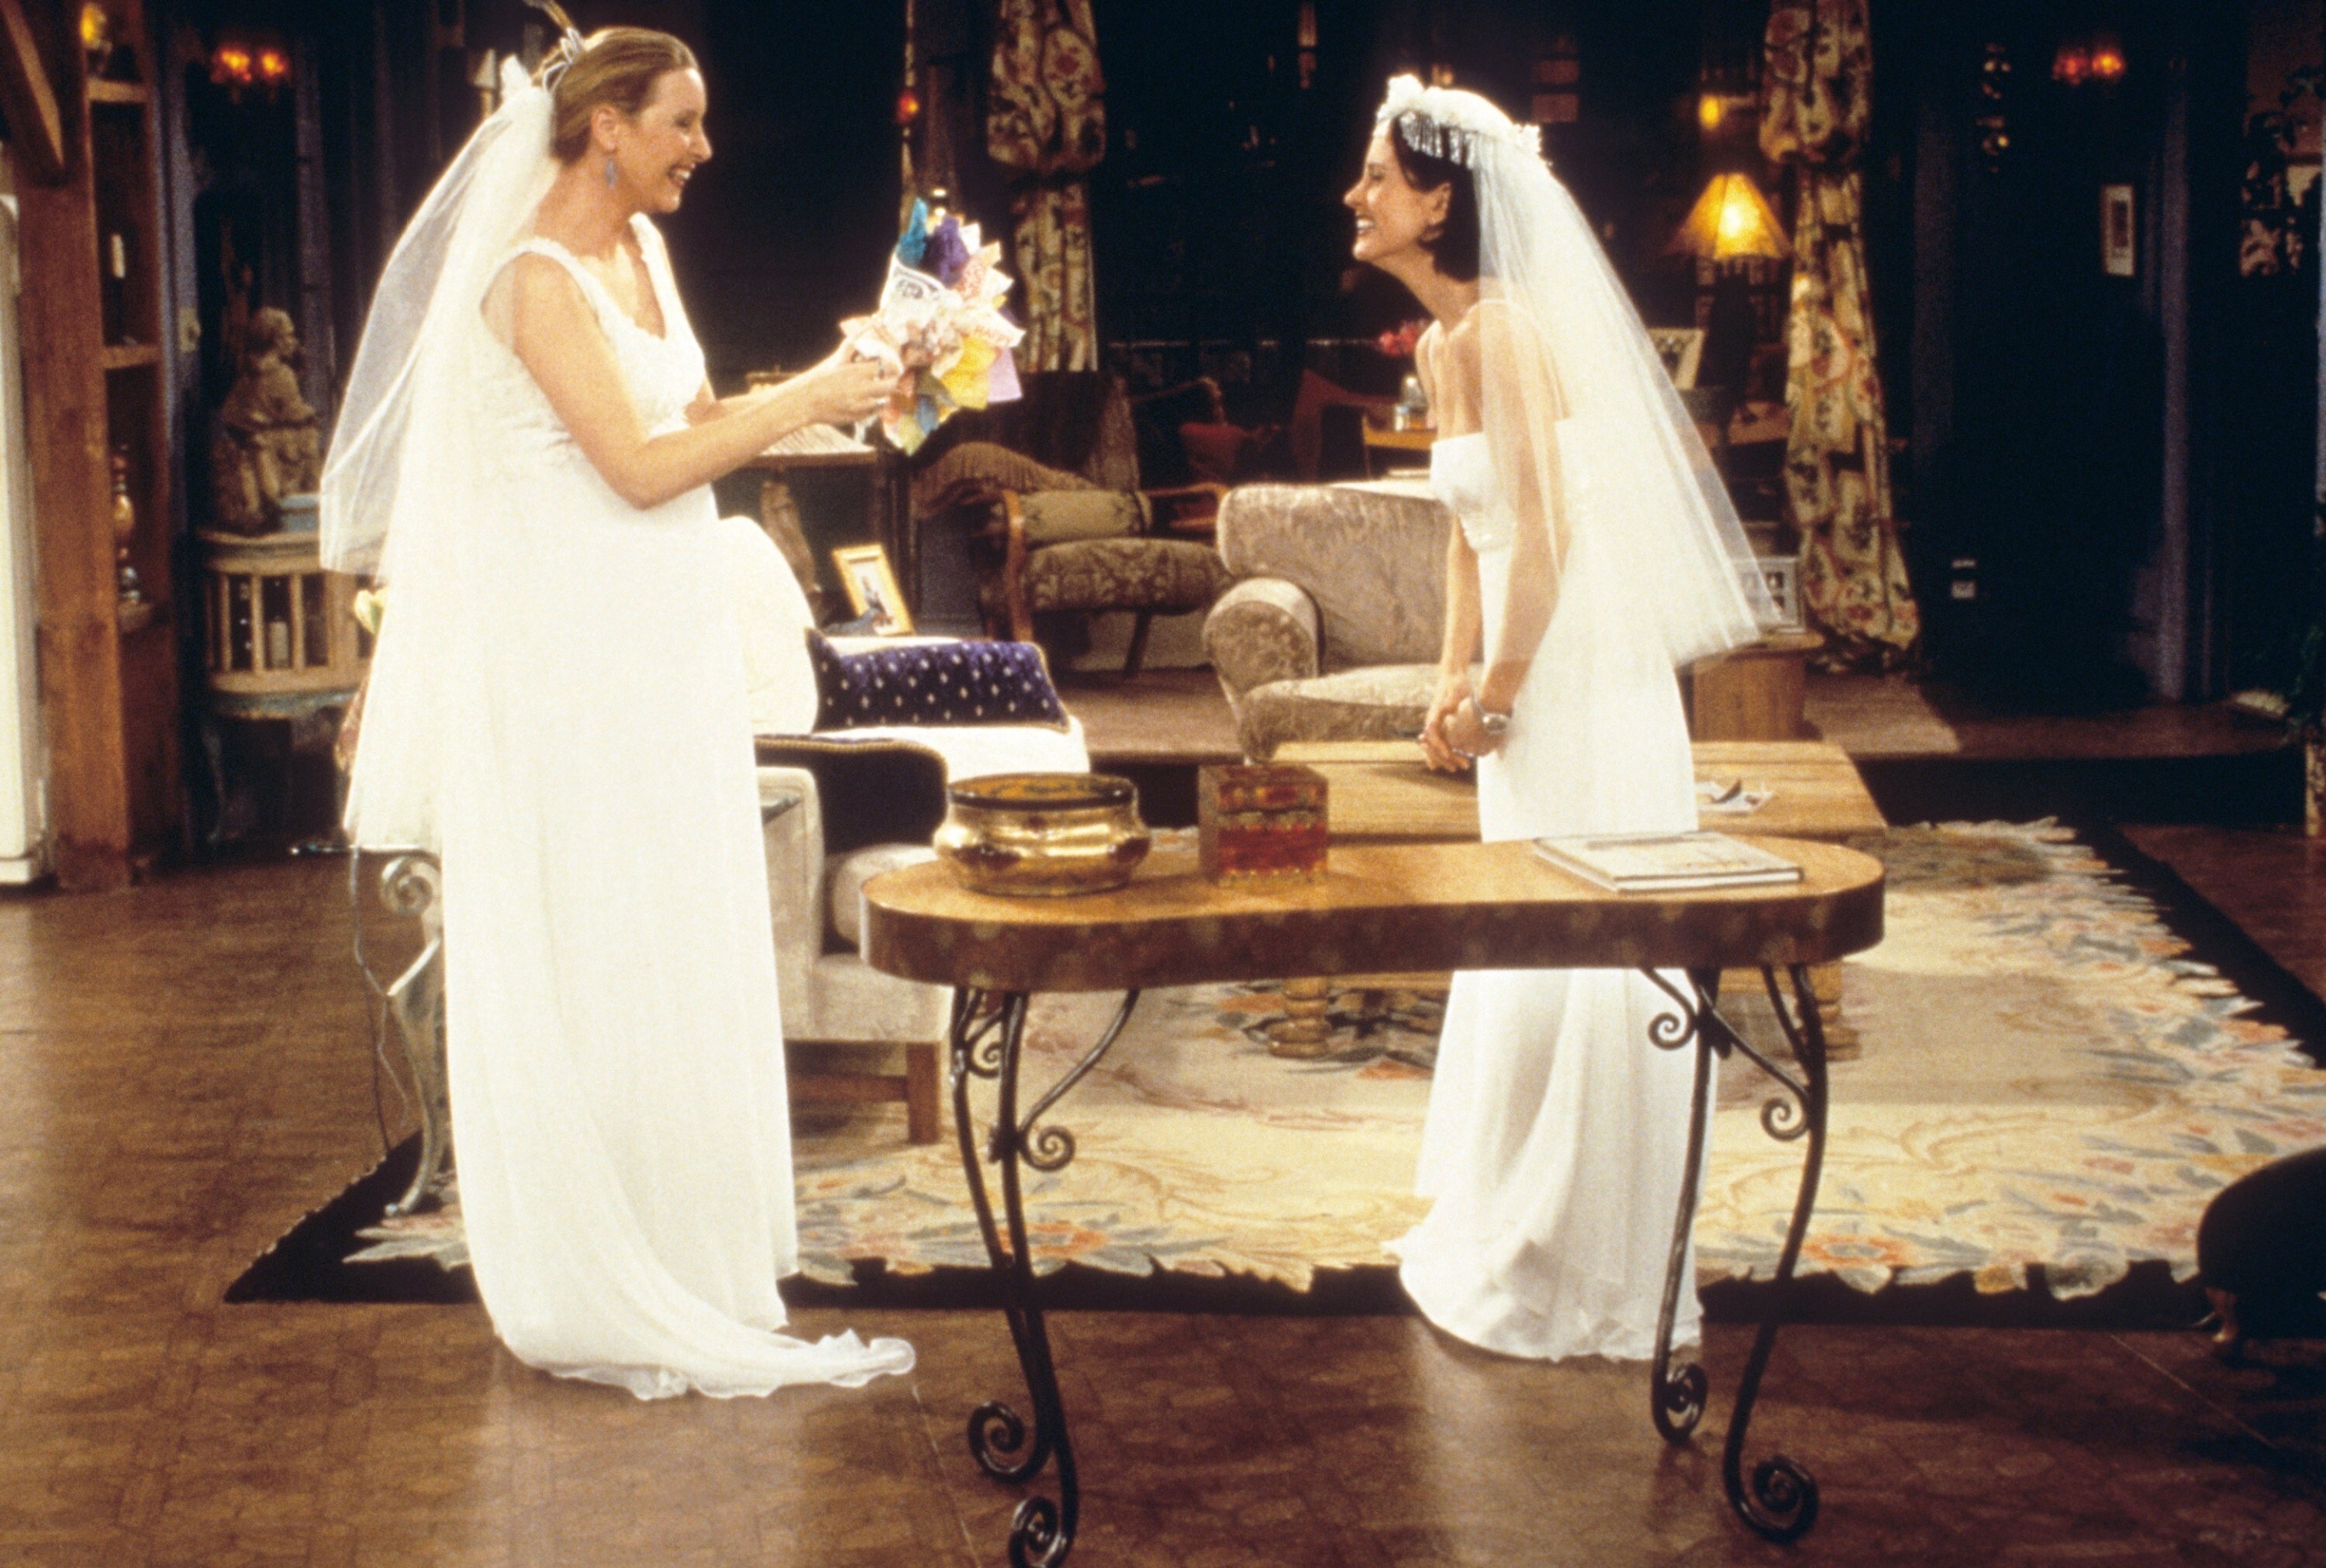 Two women stand in a living room, both in wedding dresses.